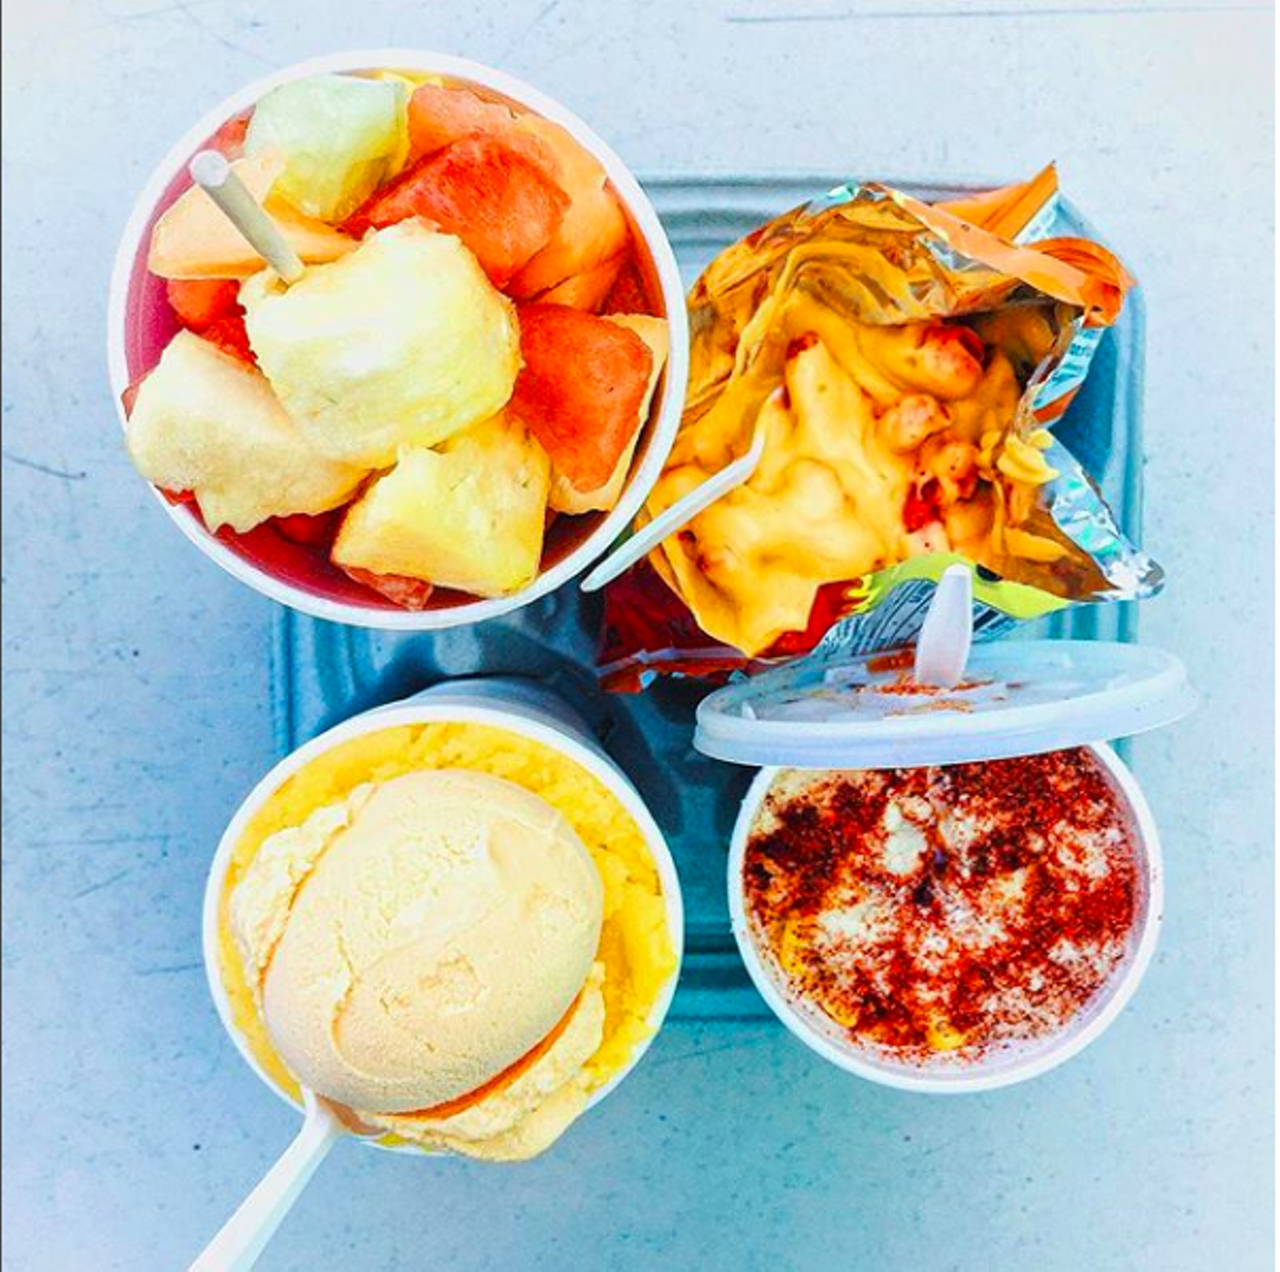 How easy it is to find raspas, mangonadas and other snack stand treats
Snack stands can be found throughout San Antonio and just keep on popping up. While common in cities with large Latino populations, we’re sure there aren’t chingos of shops in places like The Hamptons or Myrtle Beach.
Photo via Instagram / lovebriecheese